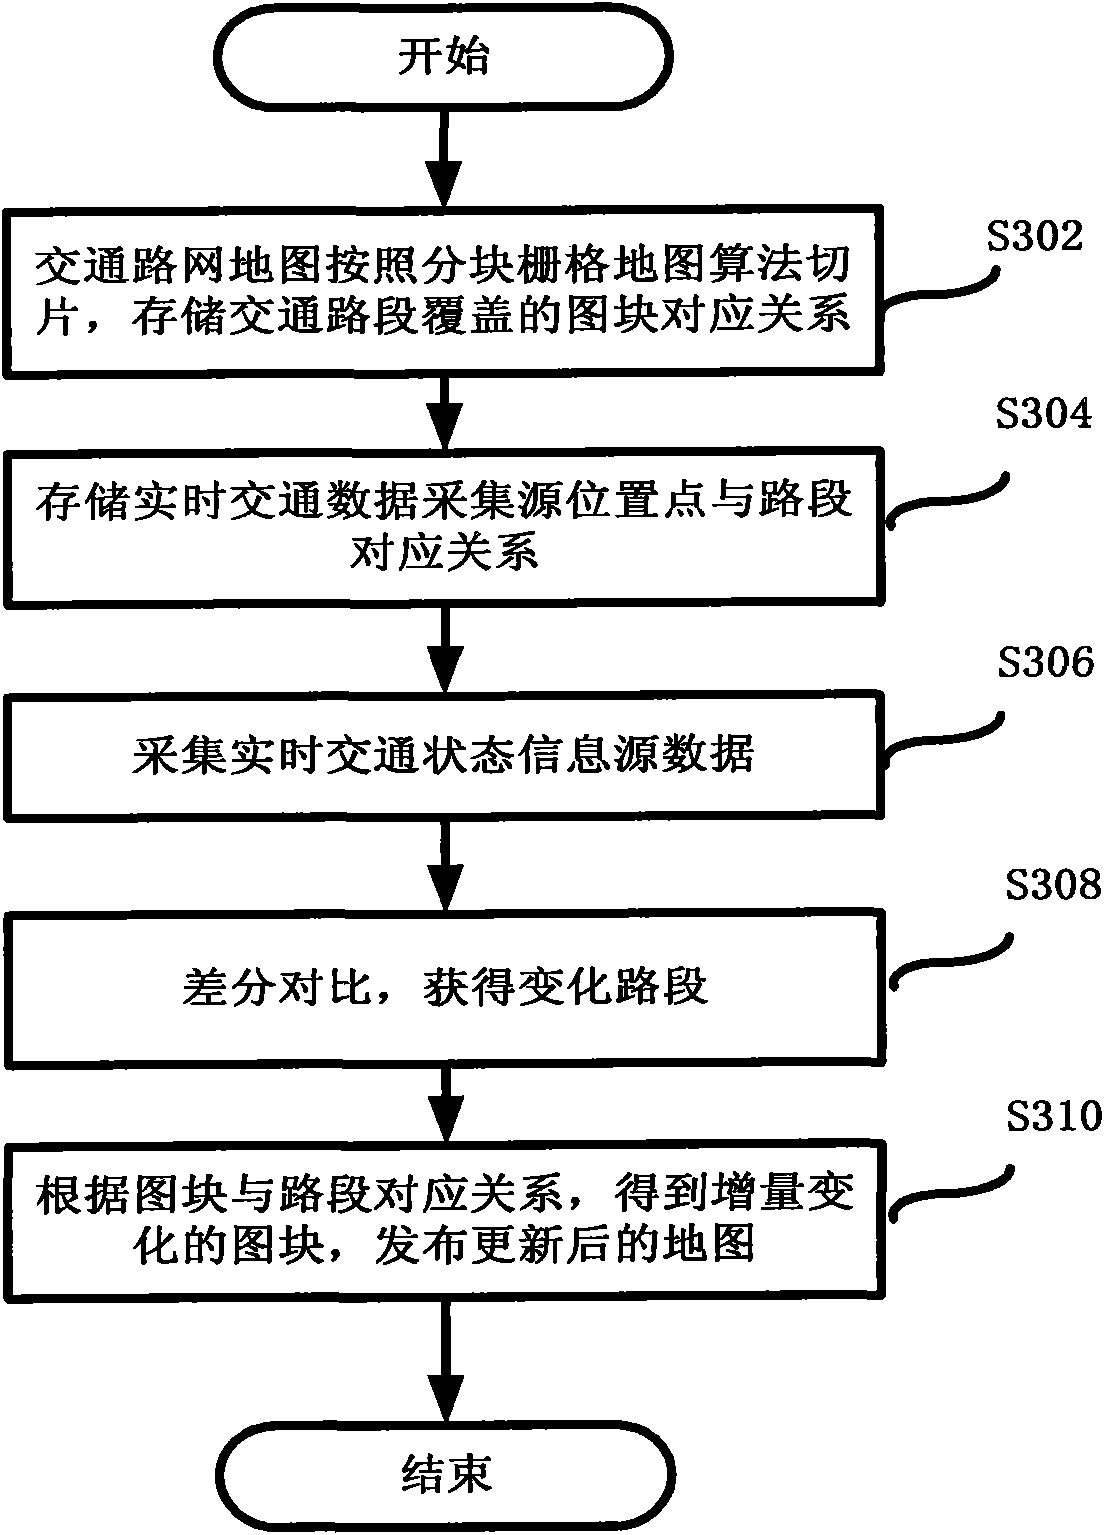 Method and system for updating real-time traffic information